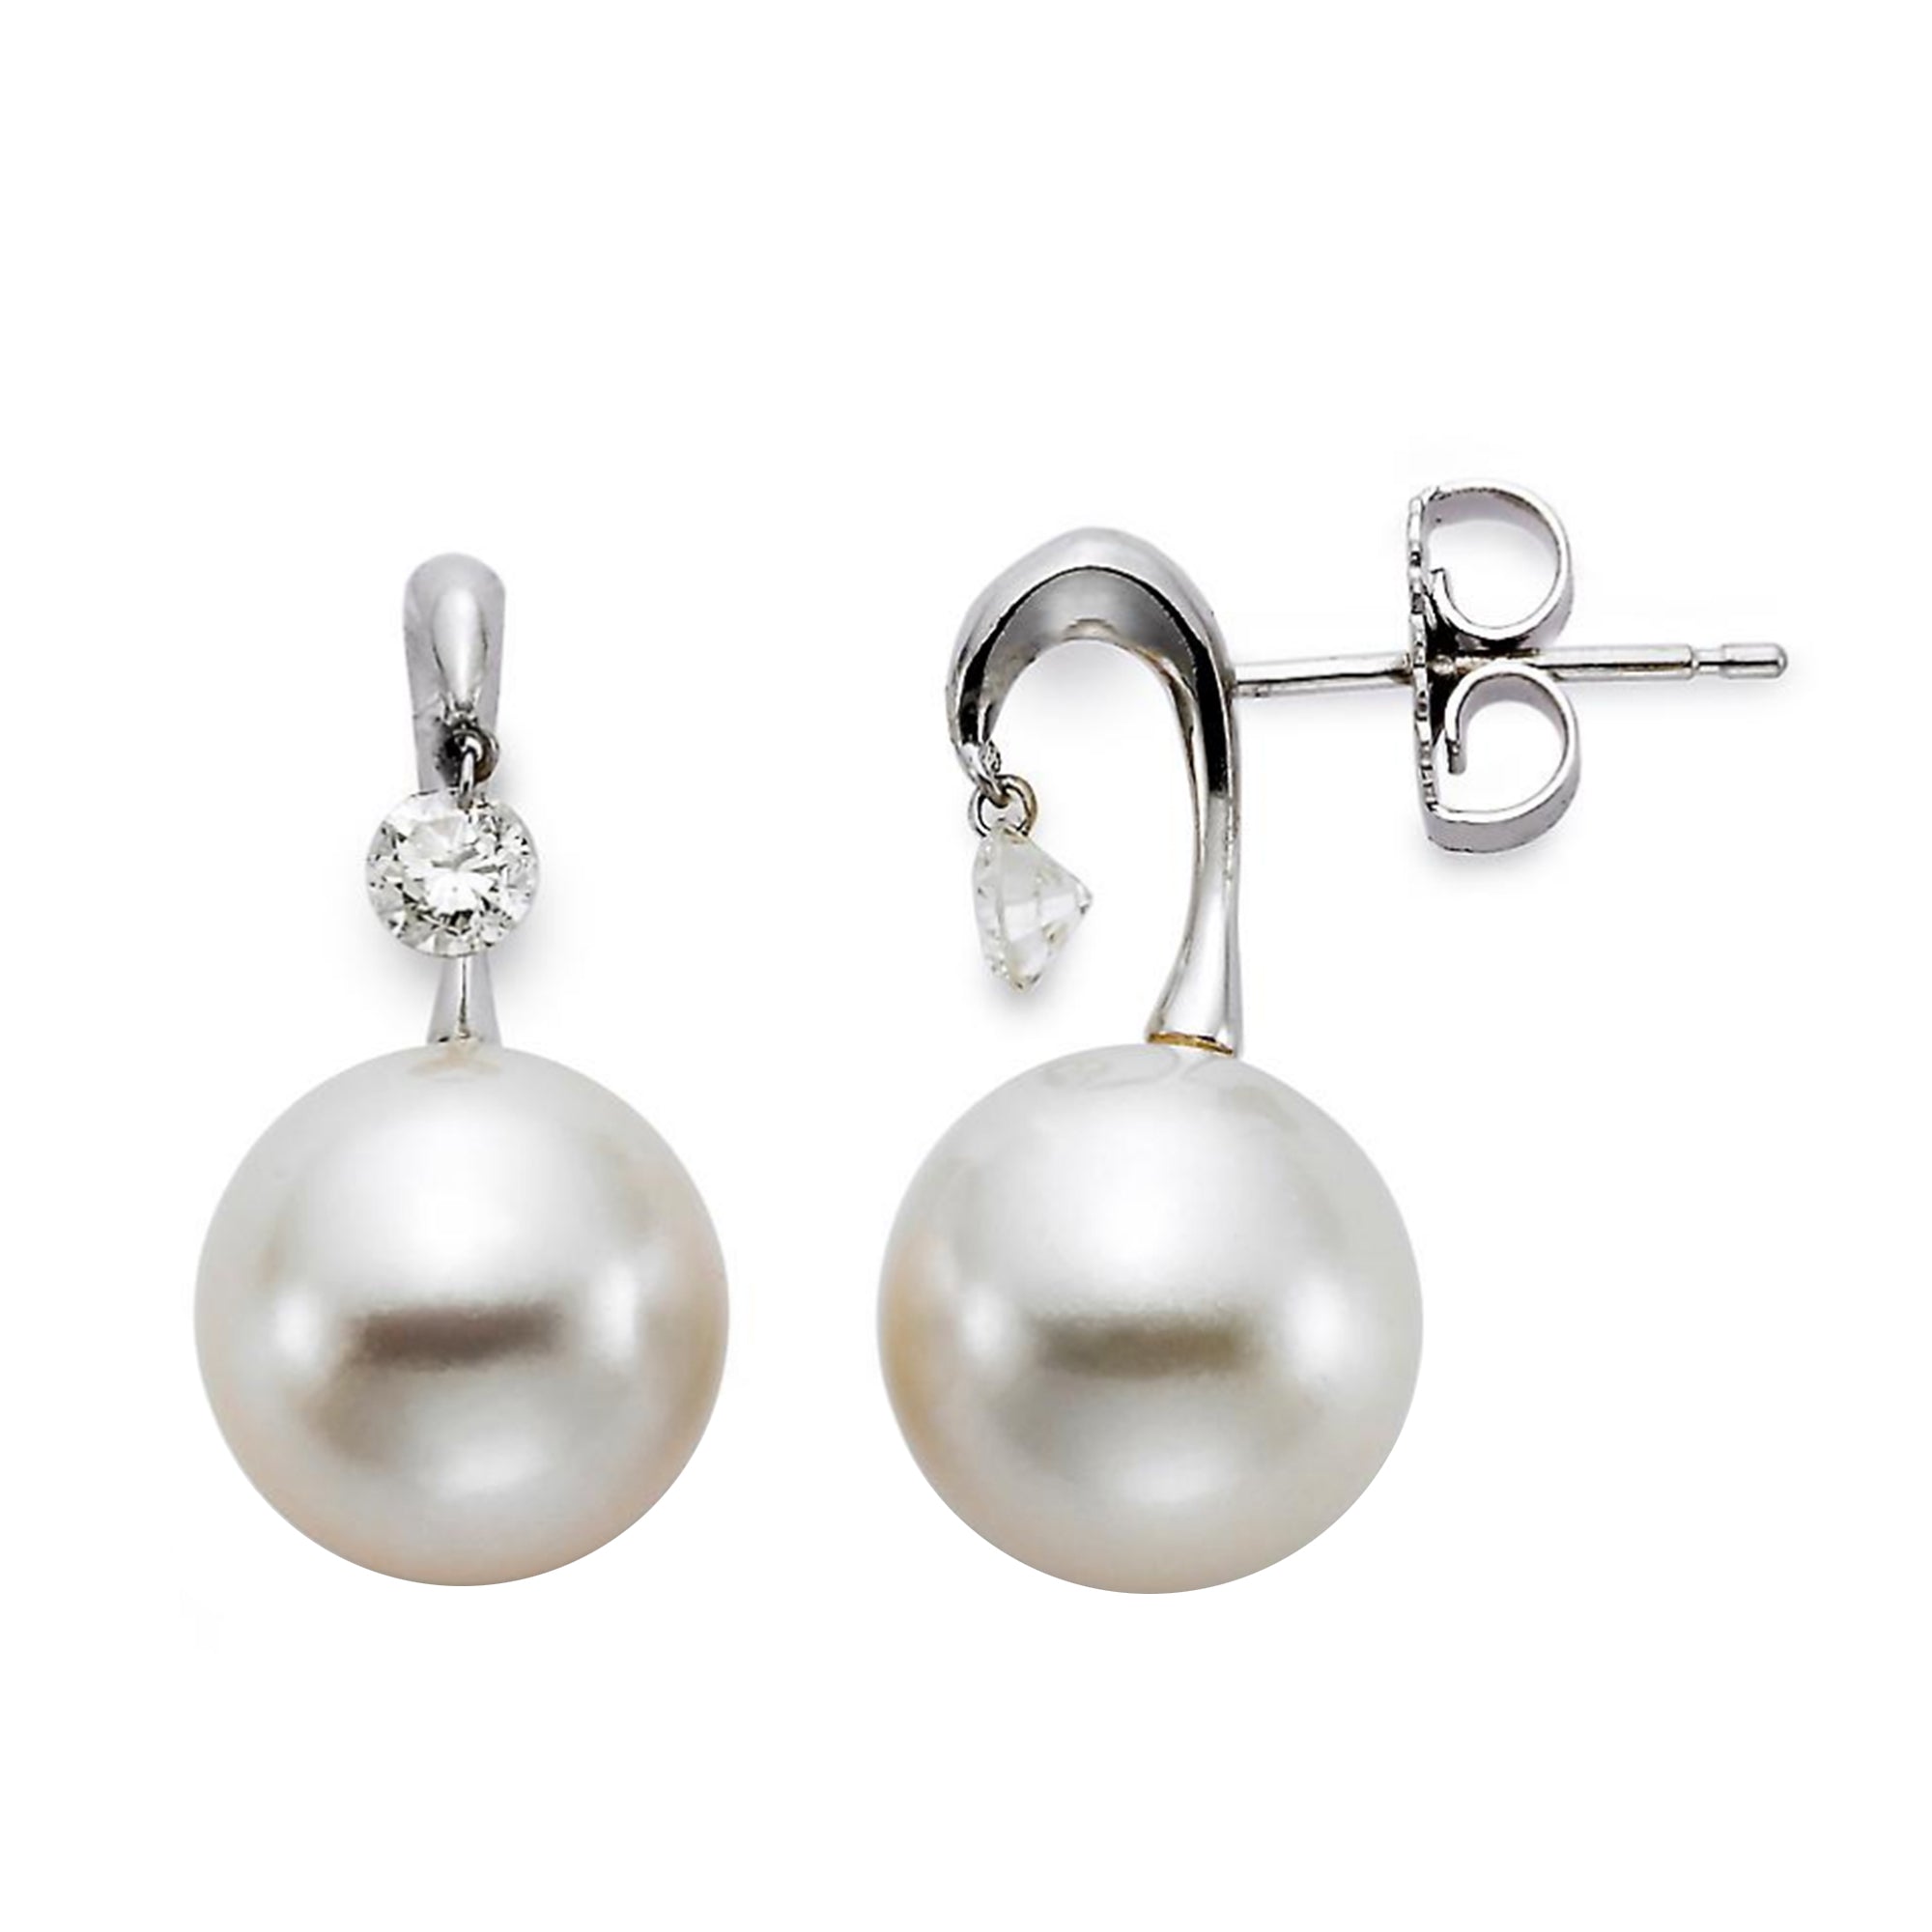 South Sea Pearl and Drilled Diamond Earrings by Mastoloni - Talisman Collection Fine Jewelers